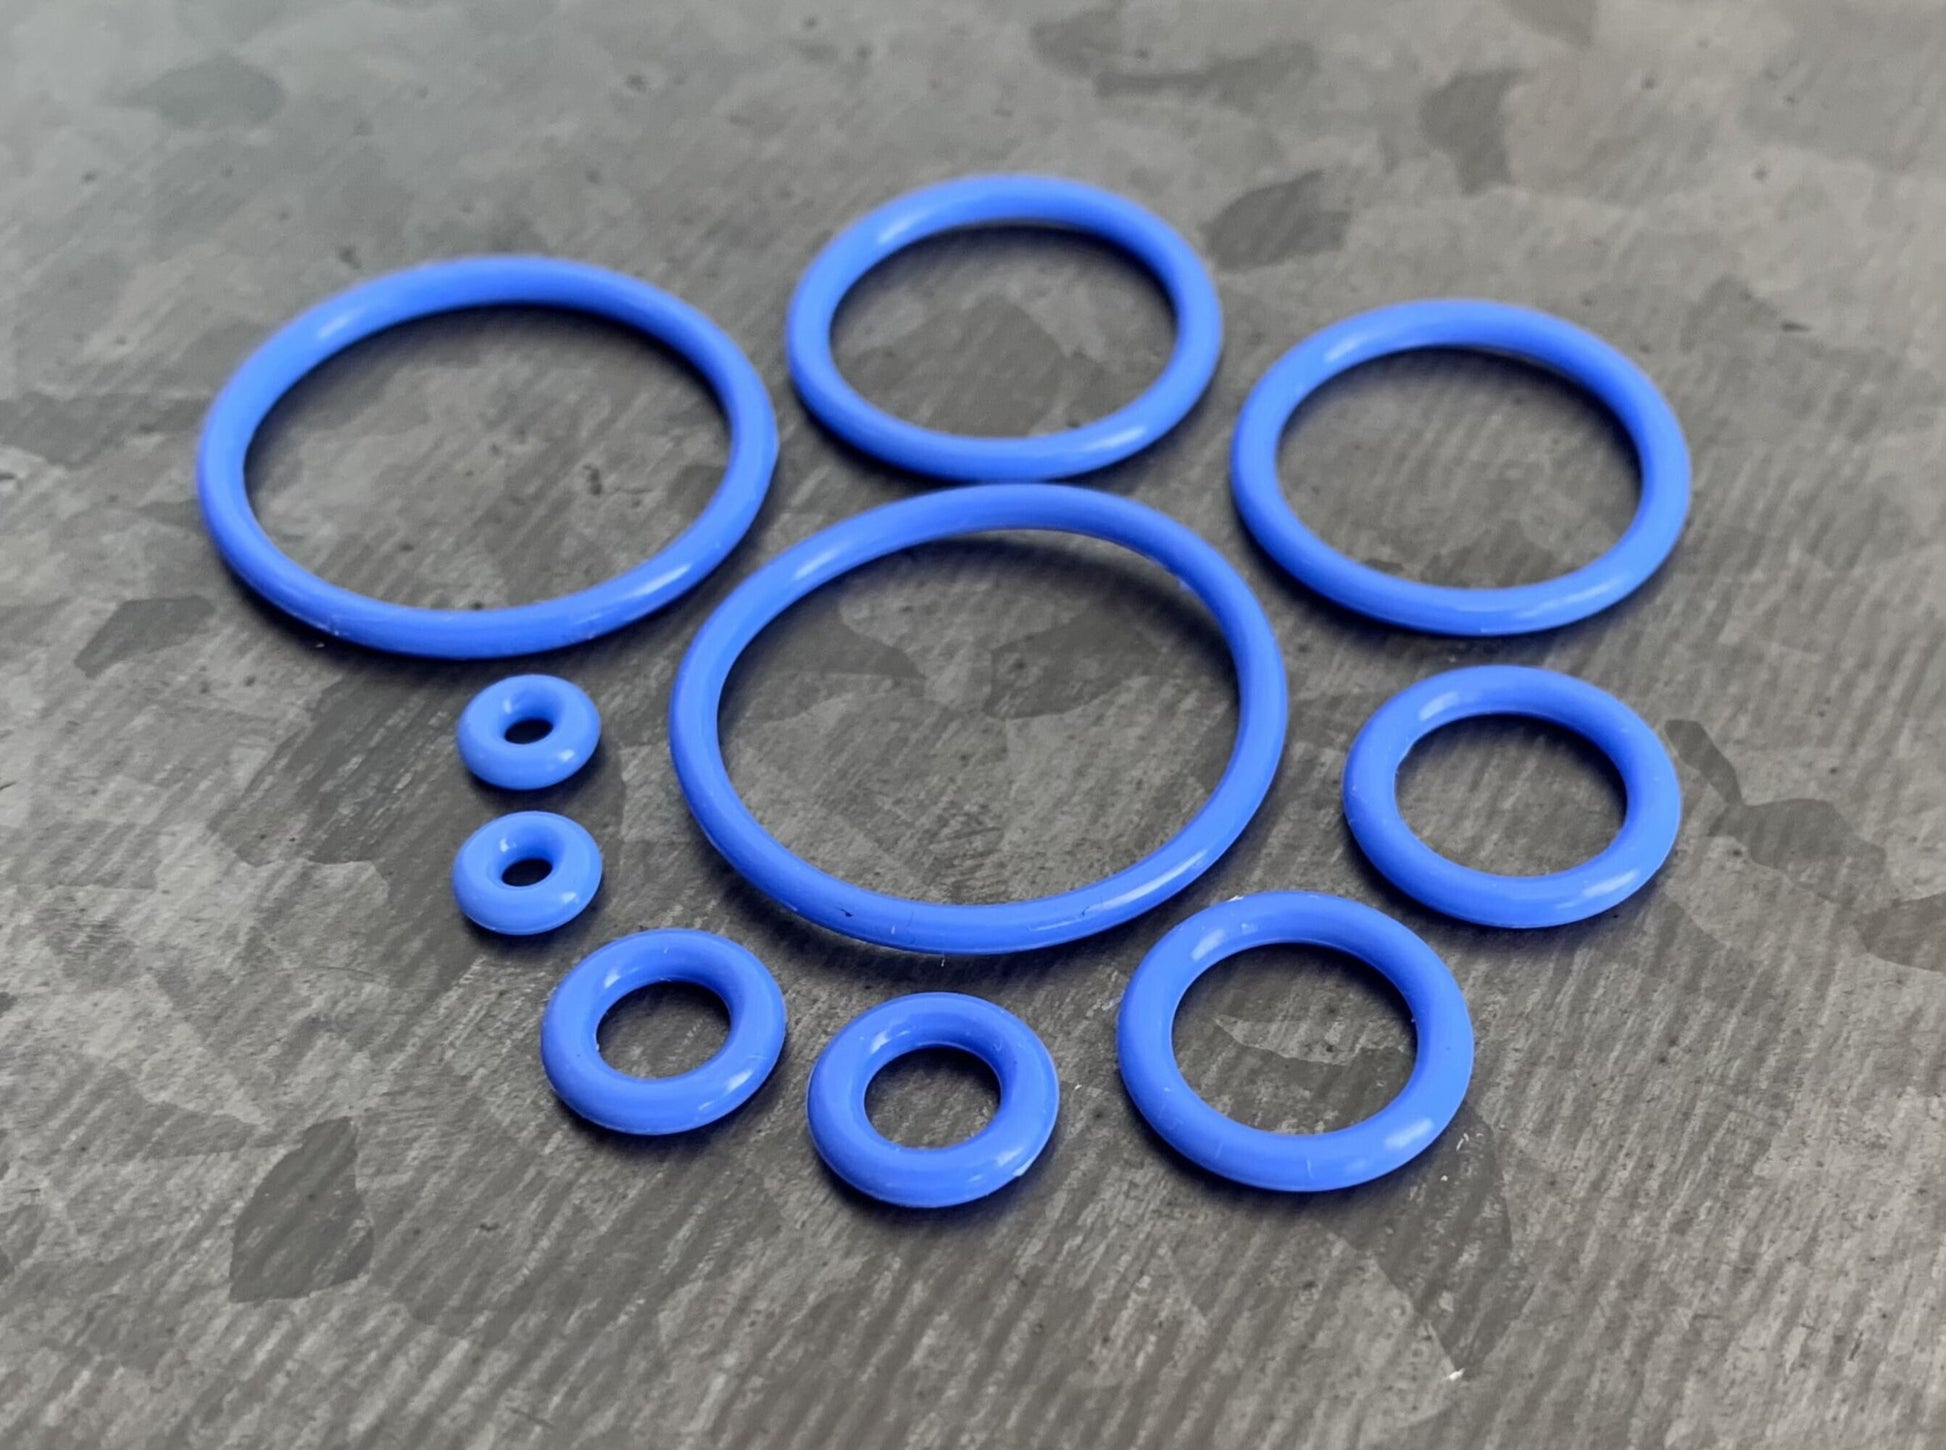 10 pack of Blue Replacement O-Rings Bands for Plugs or Tunnels - 13 more colors available!